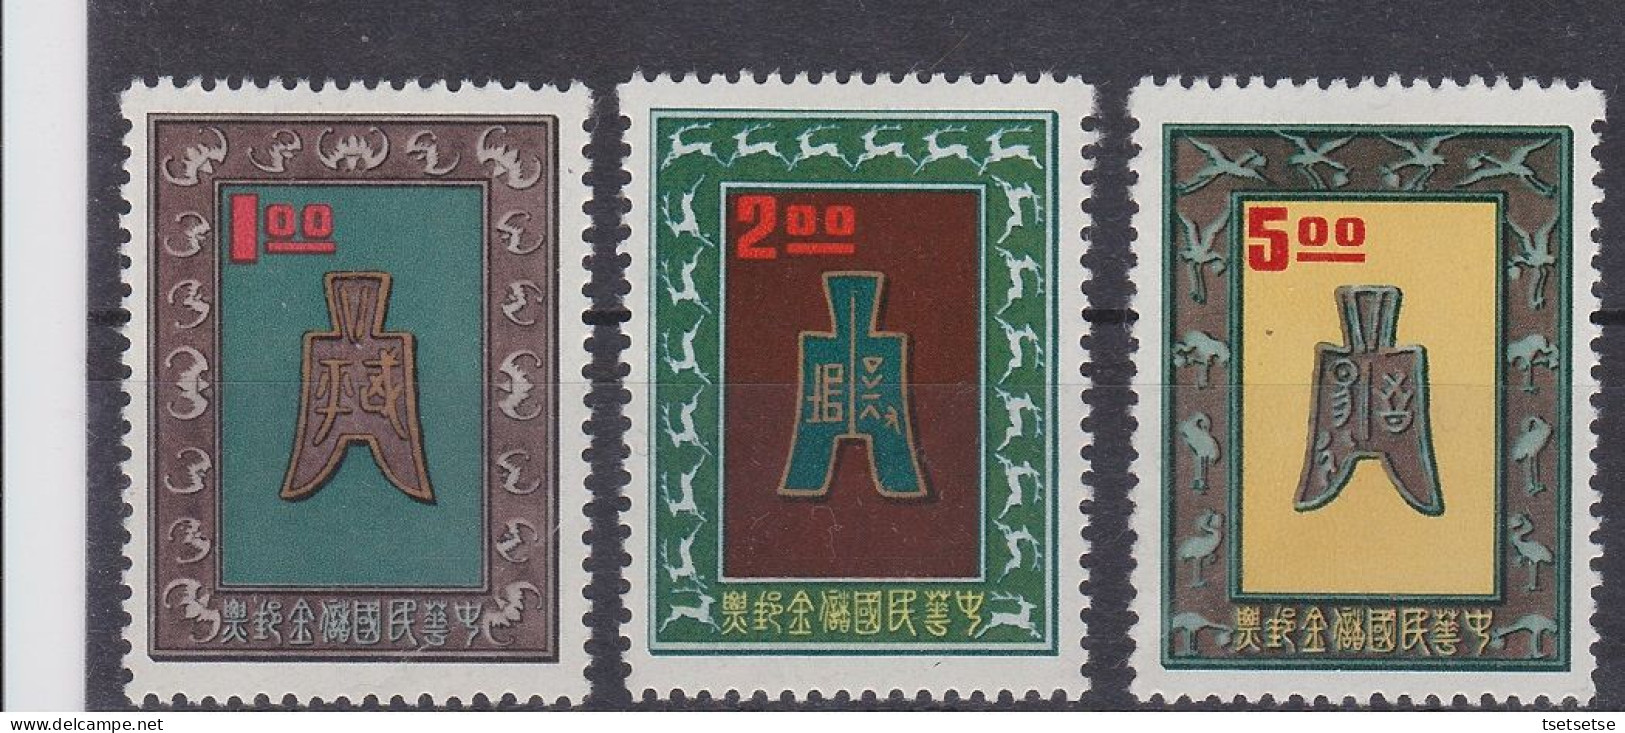 Scarce! 1962 Rep. Of China, Taiwan, Postal Savings Stamps, Set Of 3 Mint Unused, OG, No Stain - Neufs